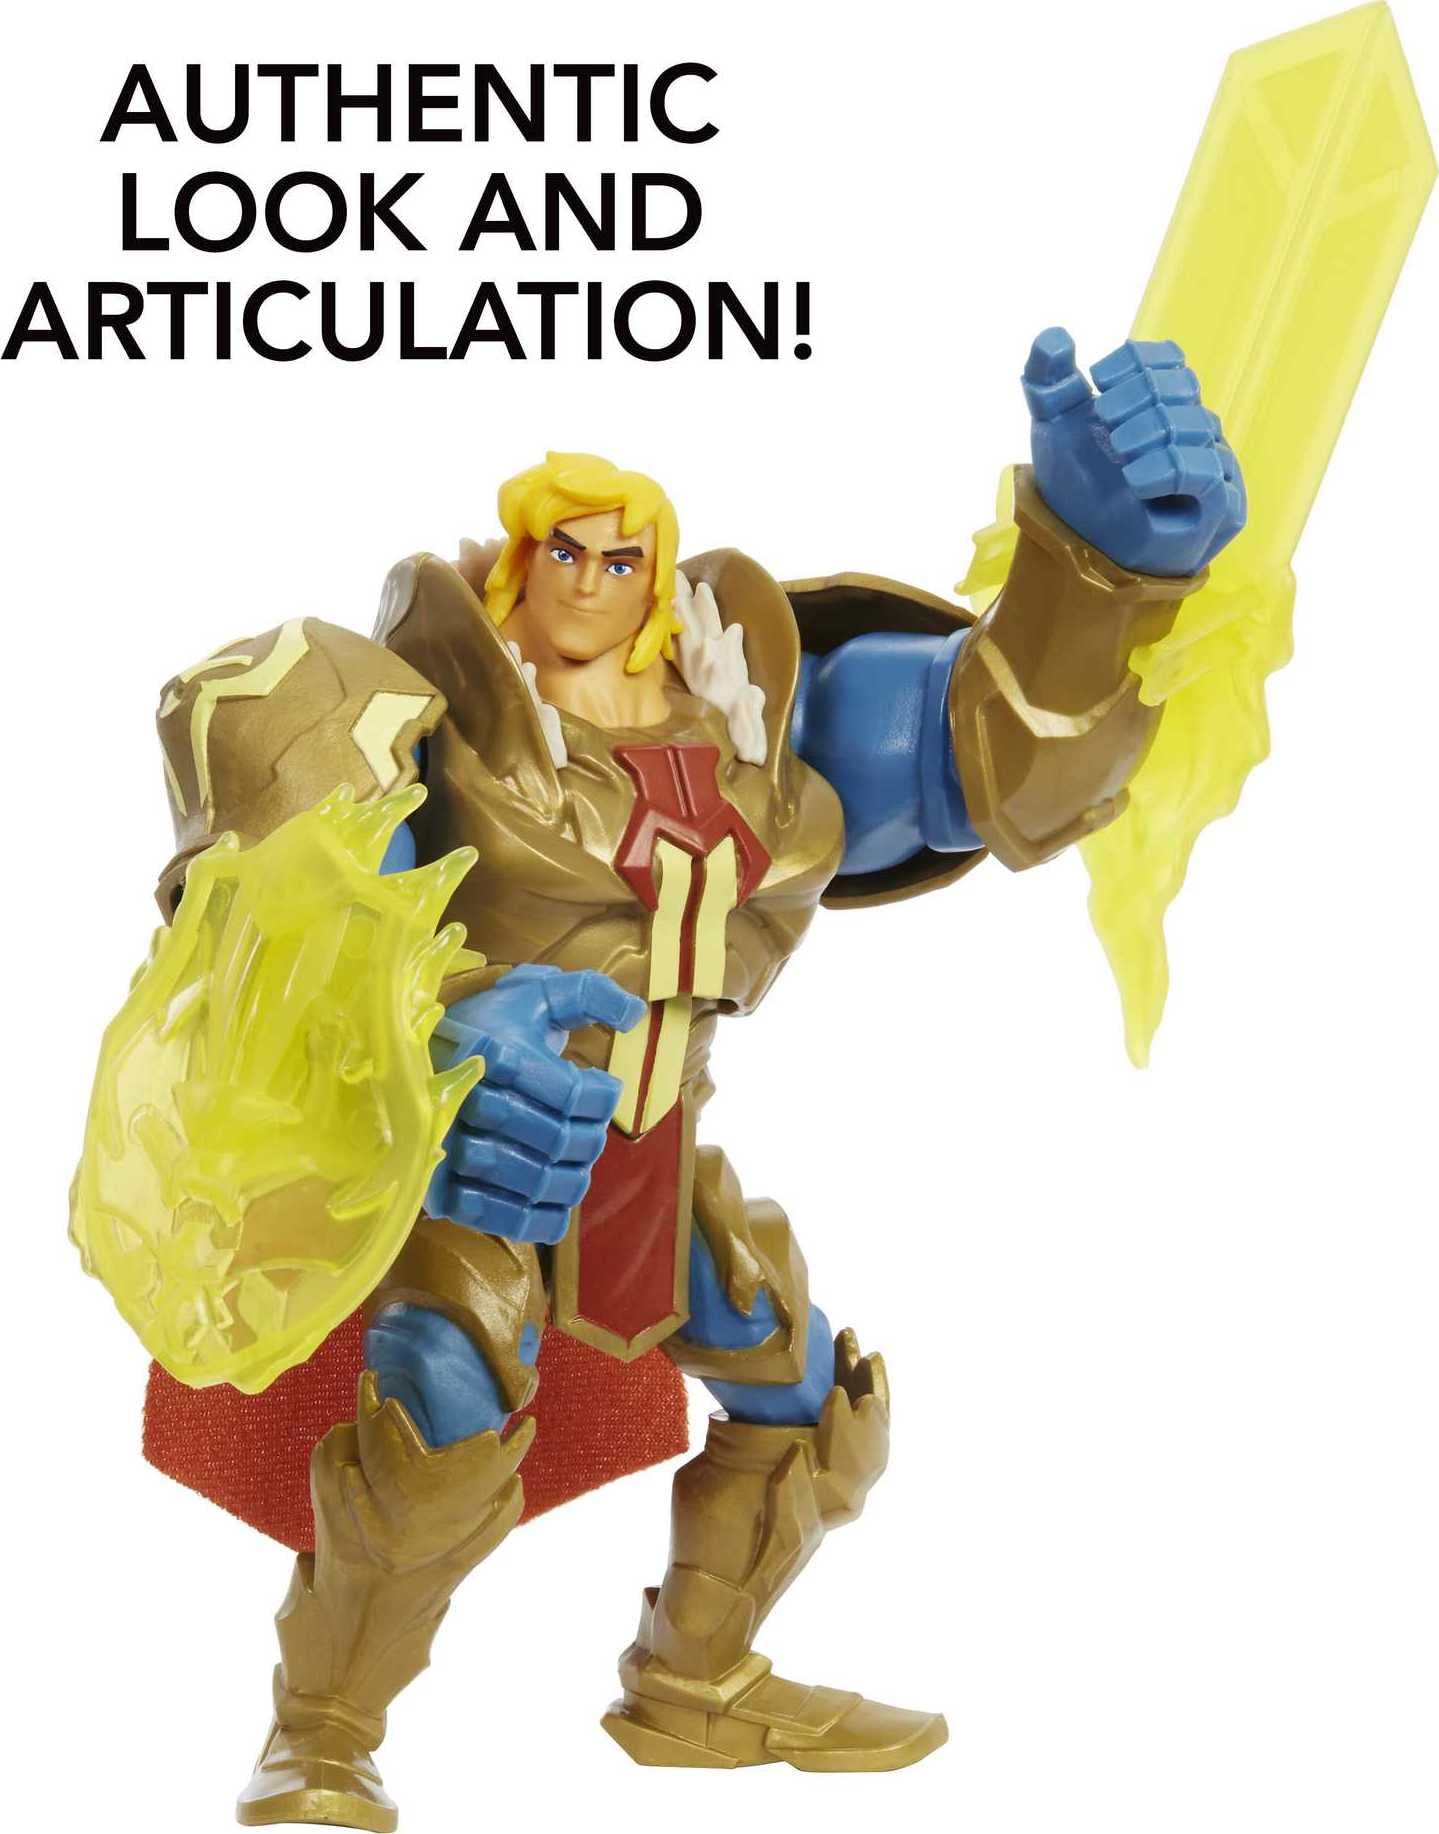 He-Man and the Masters of the Universe He-Man Action Figure in Grayskull Armor with Power Attack Move & 2 Accessories Inspired by MOTU Netflix Animated Series, 5.5-in Collectible Toy for Kids Ages 4+